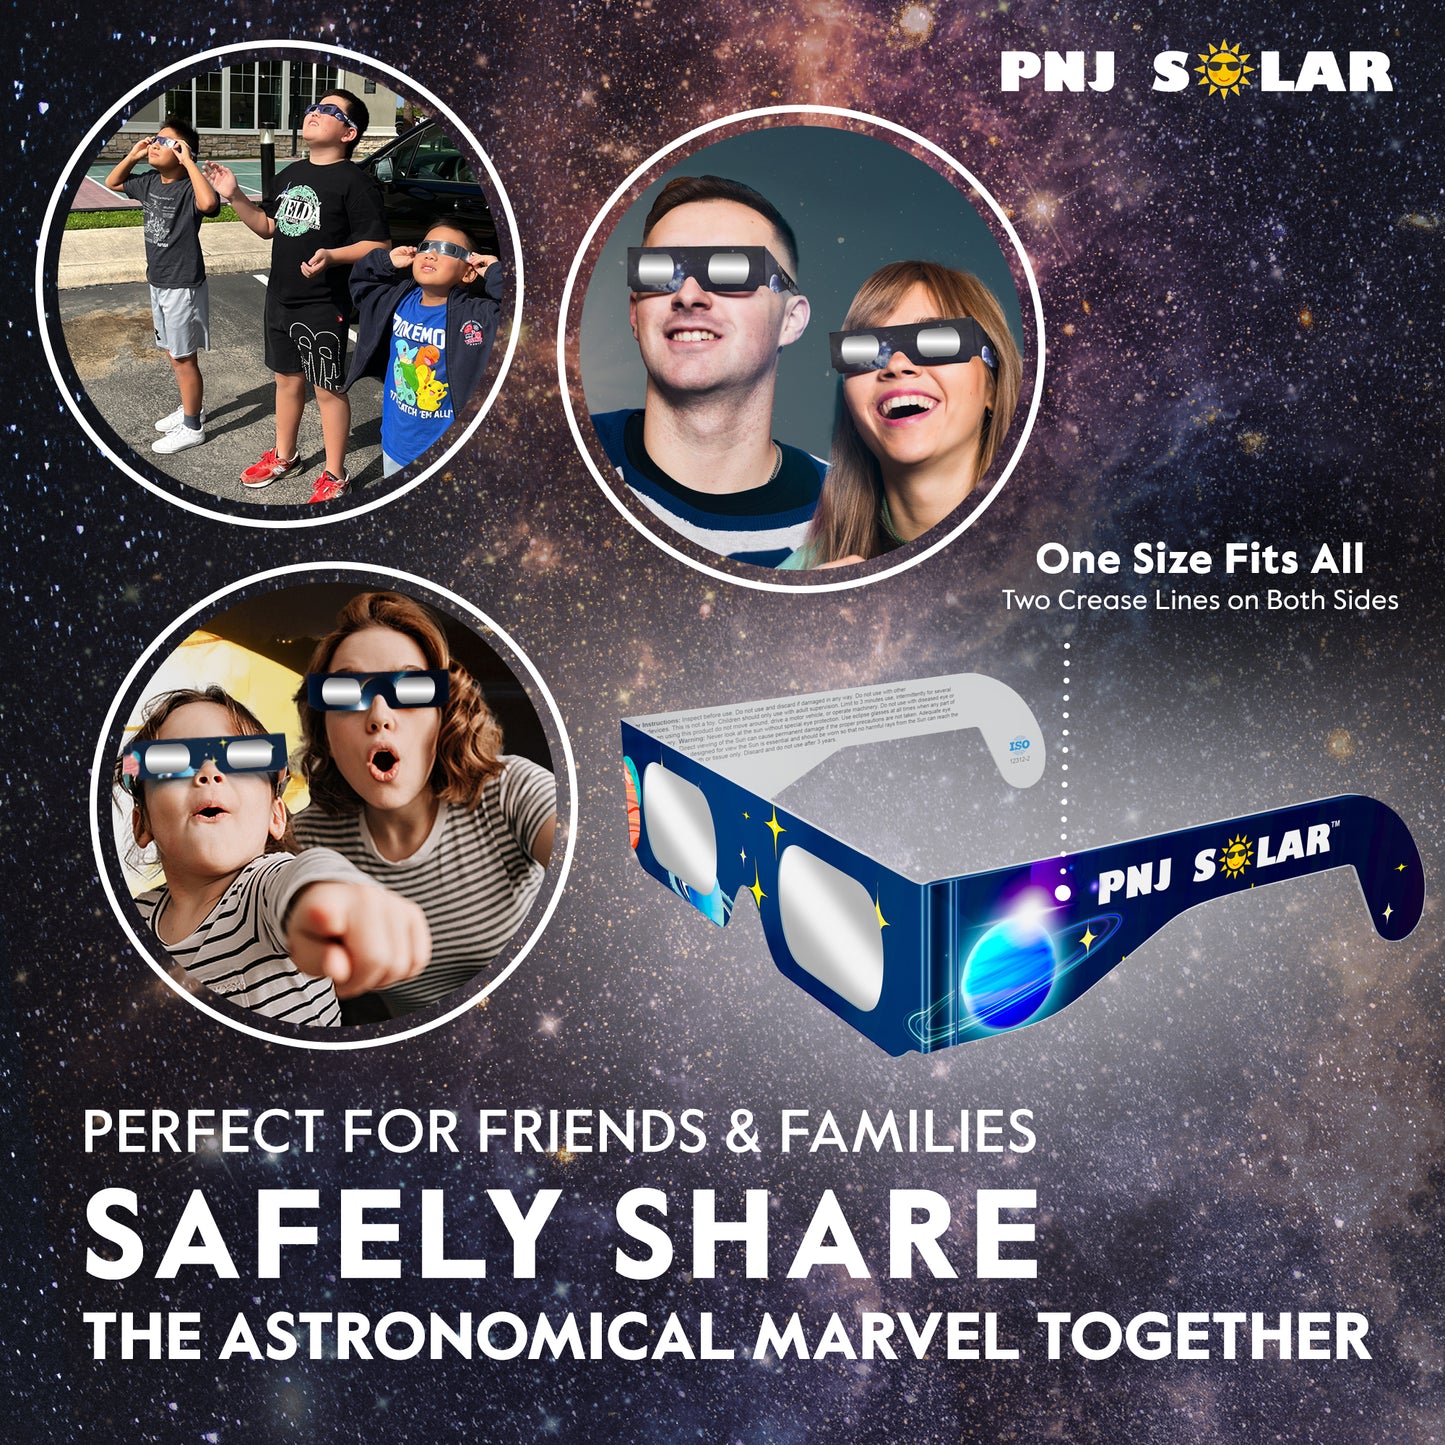 10 Pack - Solar Eclipse Glasses - ISO Certified - AAS Approved